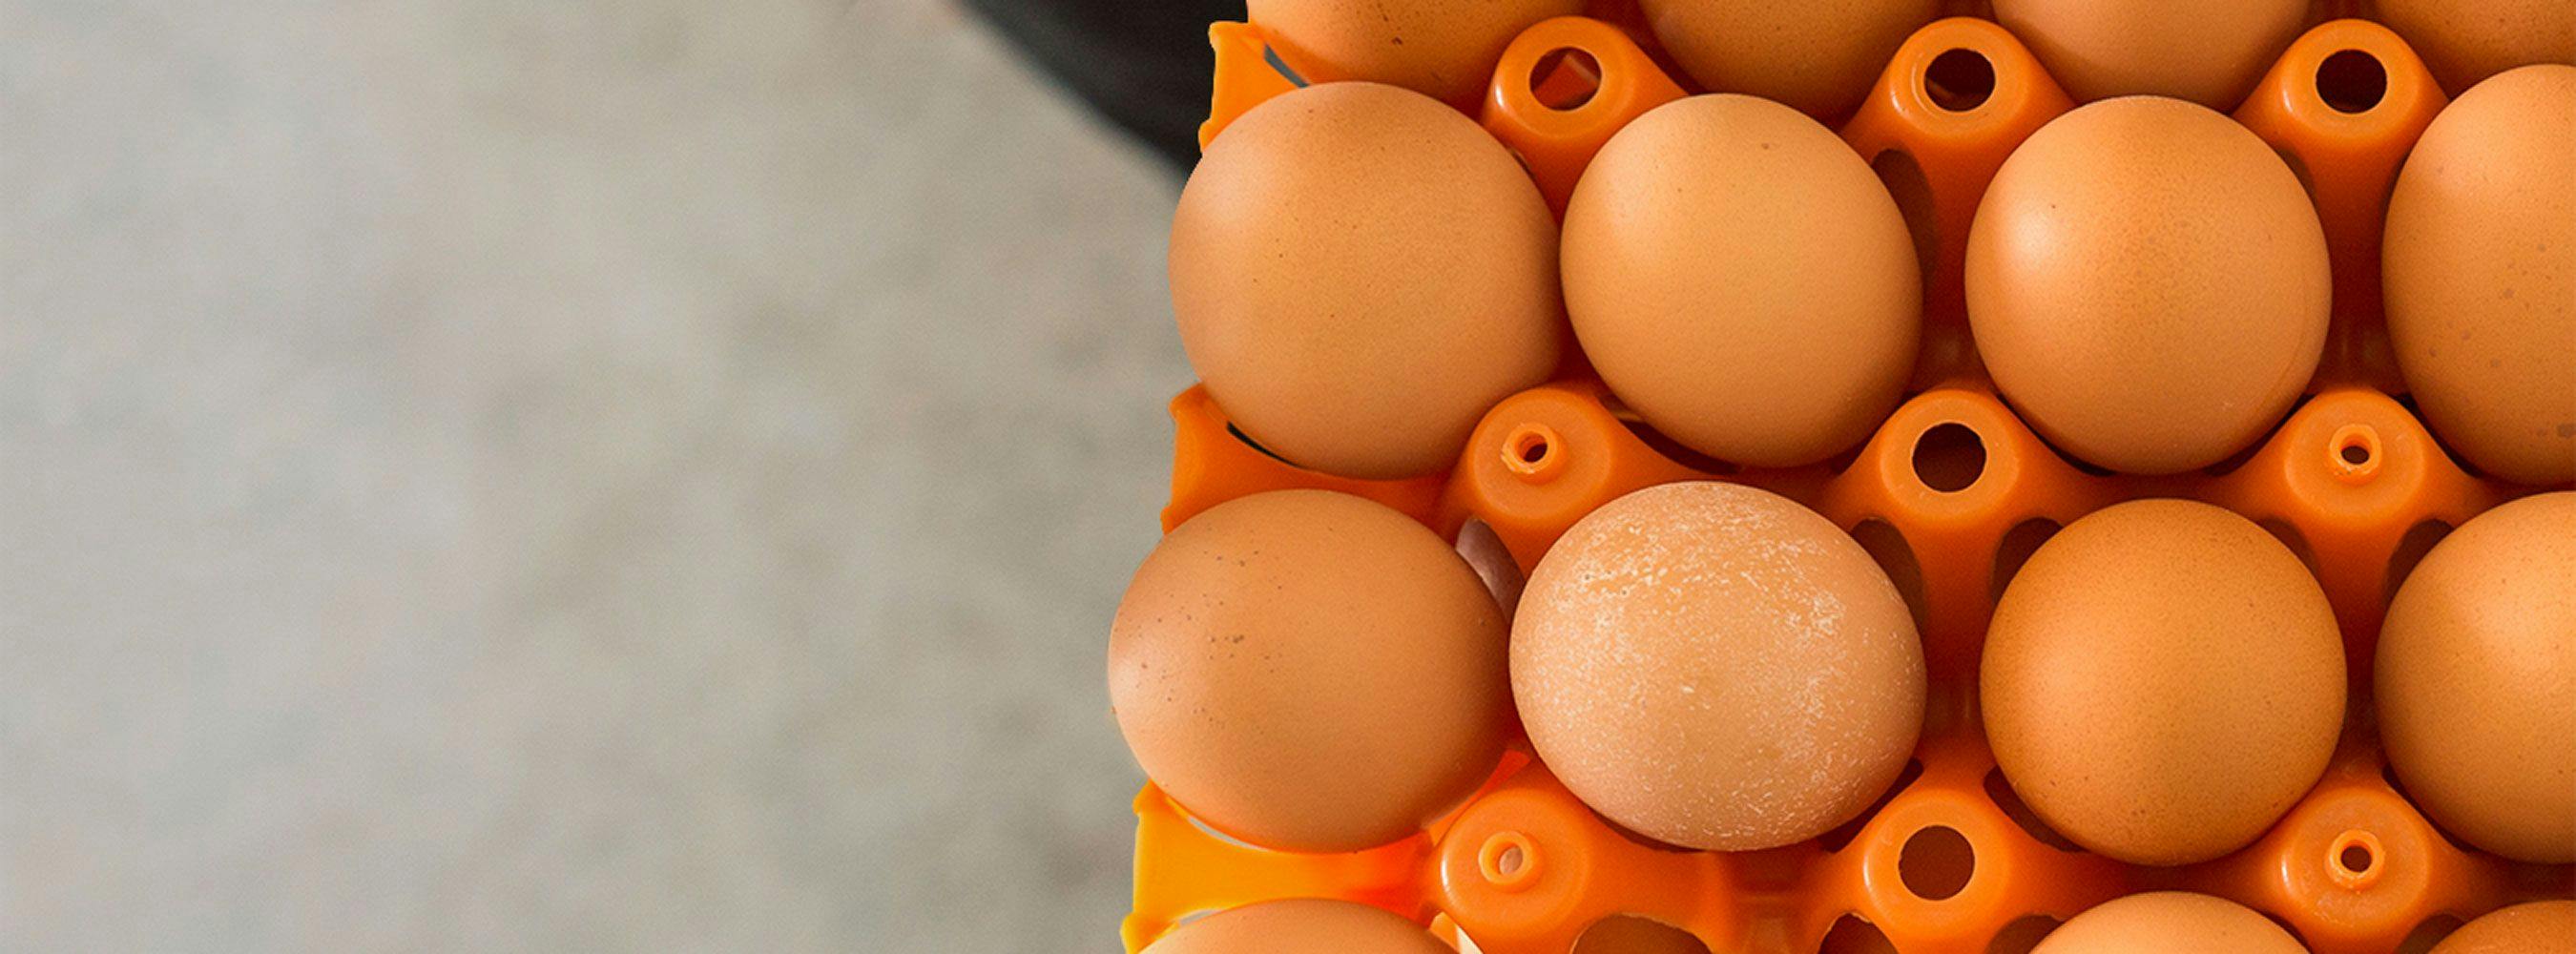 A crate of brown, organic eggs.